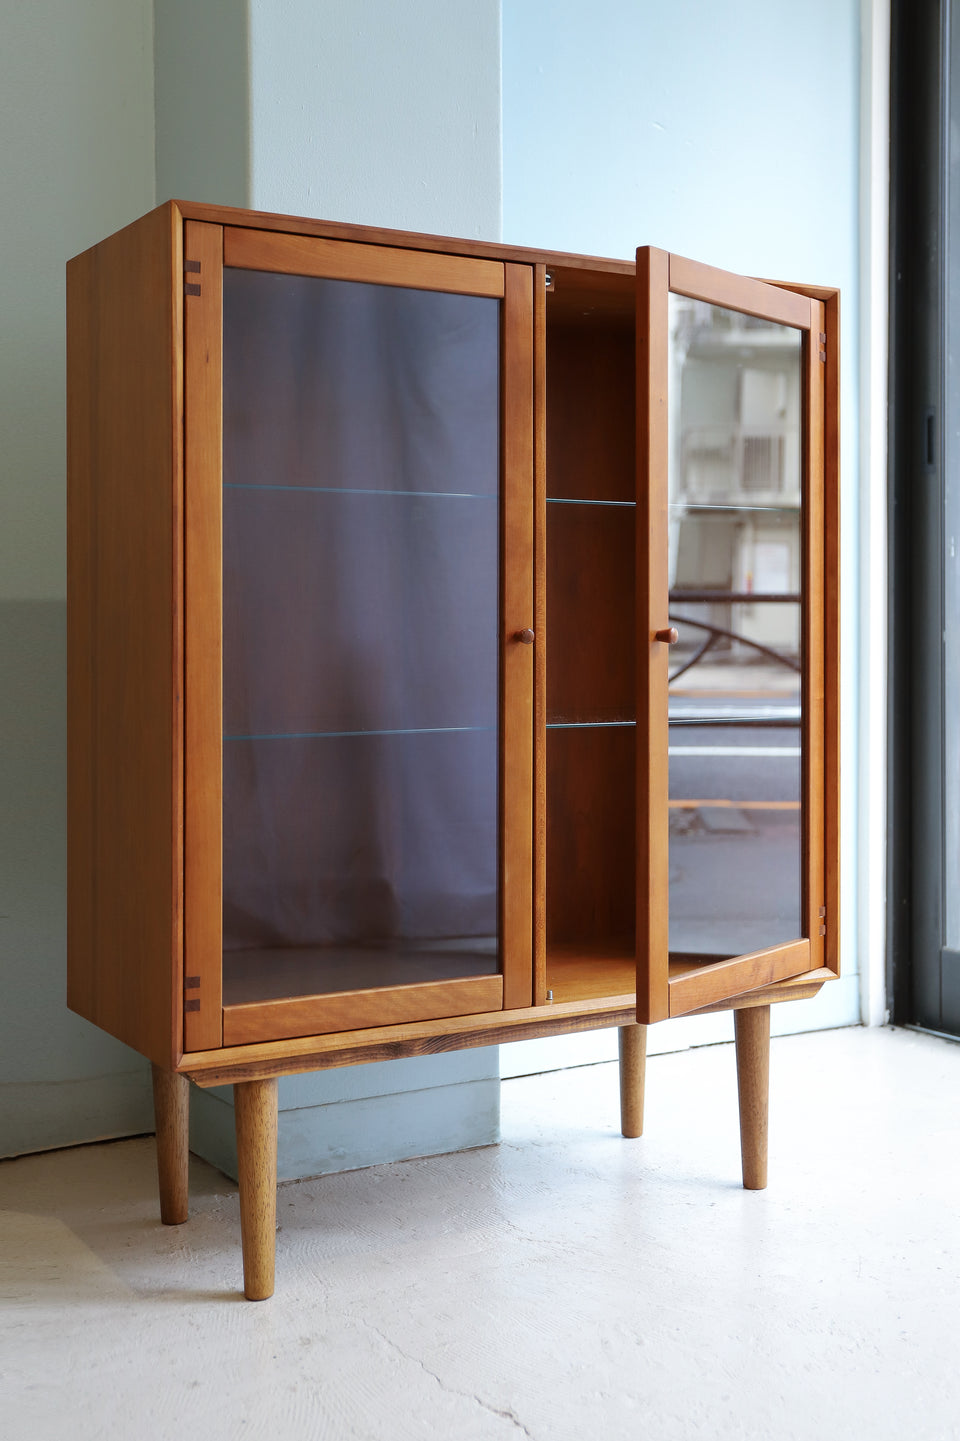 CFC Silkeborg Glass Cabinet Naver Collection/デンマーク ガラスキャビネット チェリー材 北欧家具